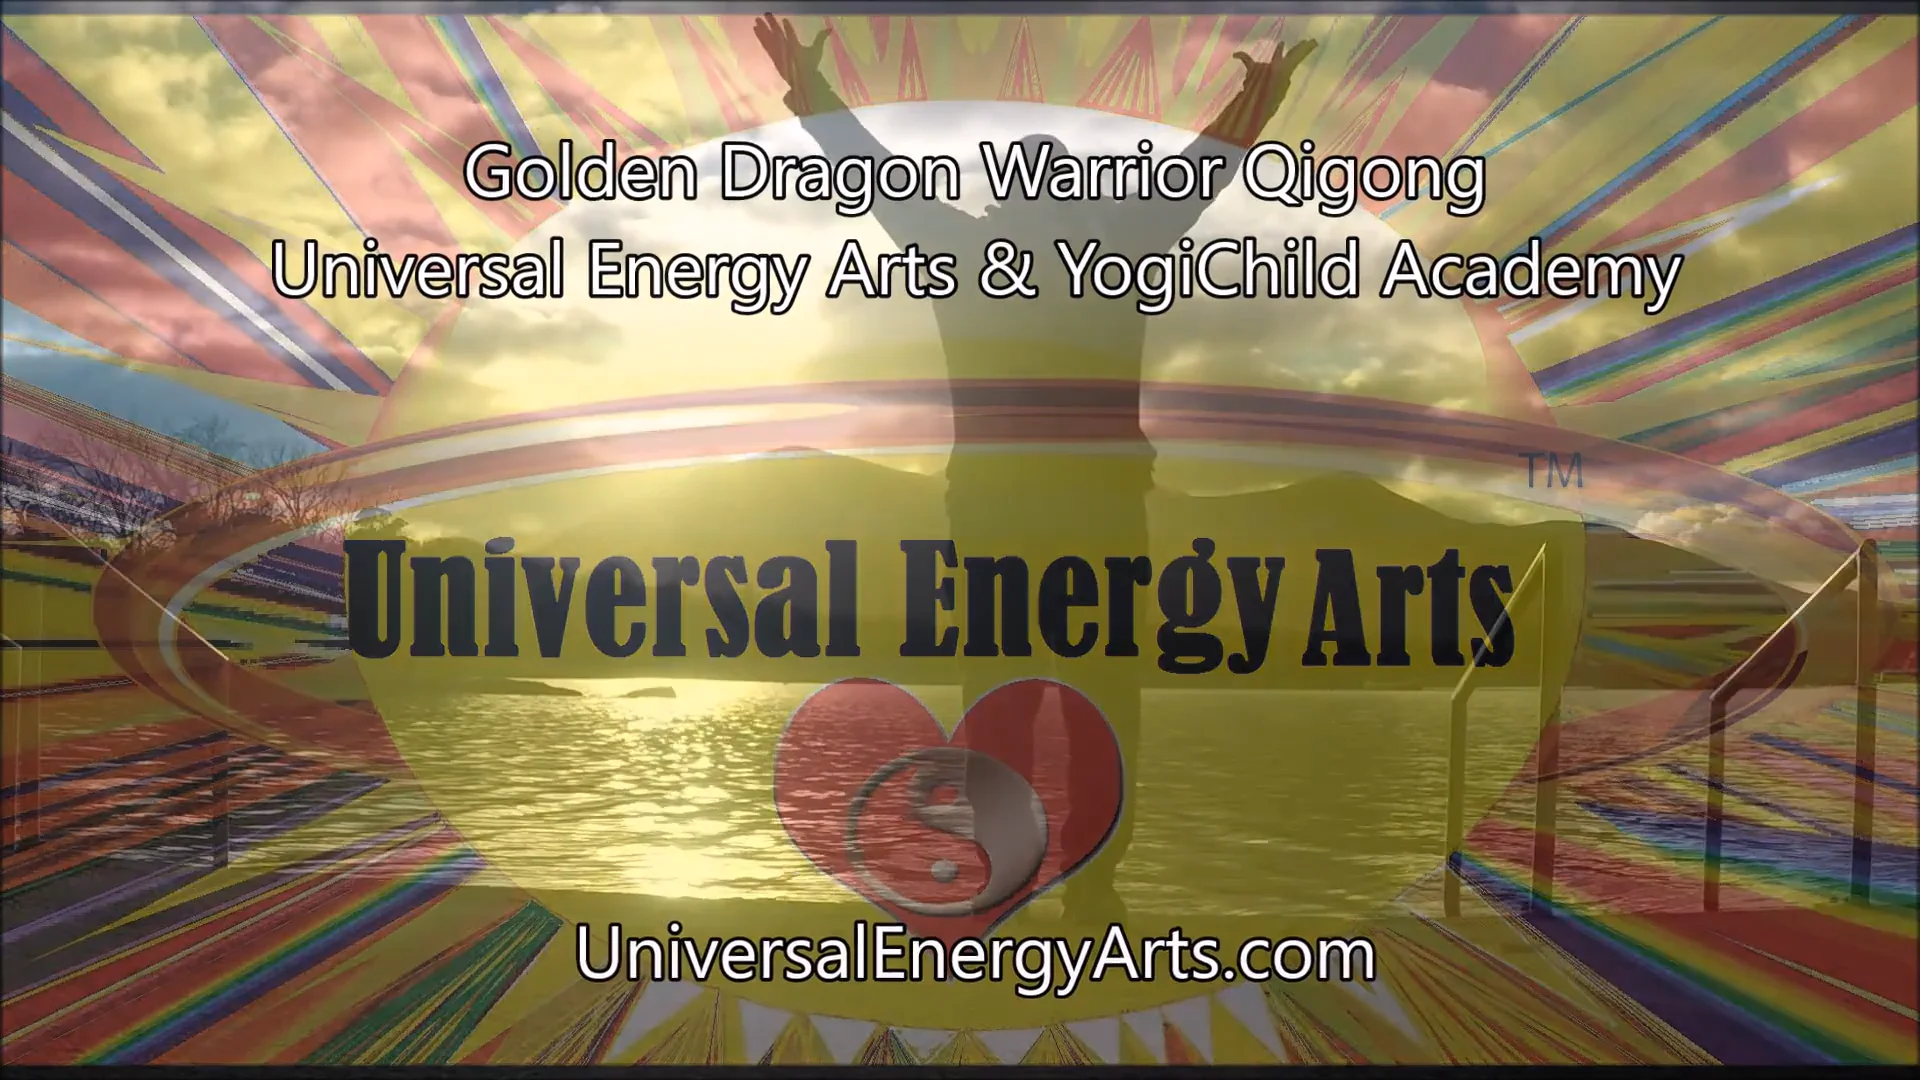 What is Chi, and what is it for? - Universal Energy Arts & YogiChild  Academy 